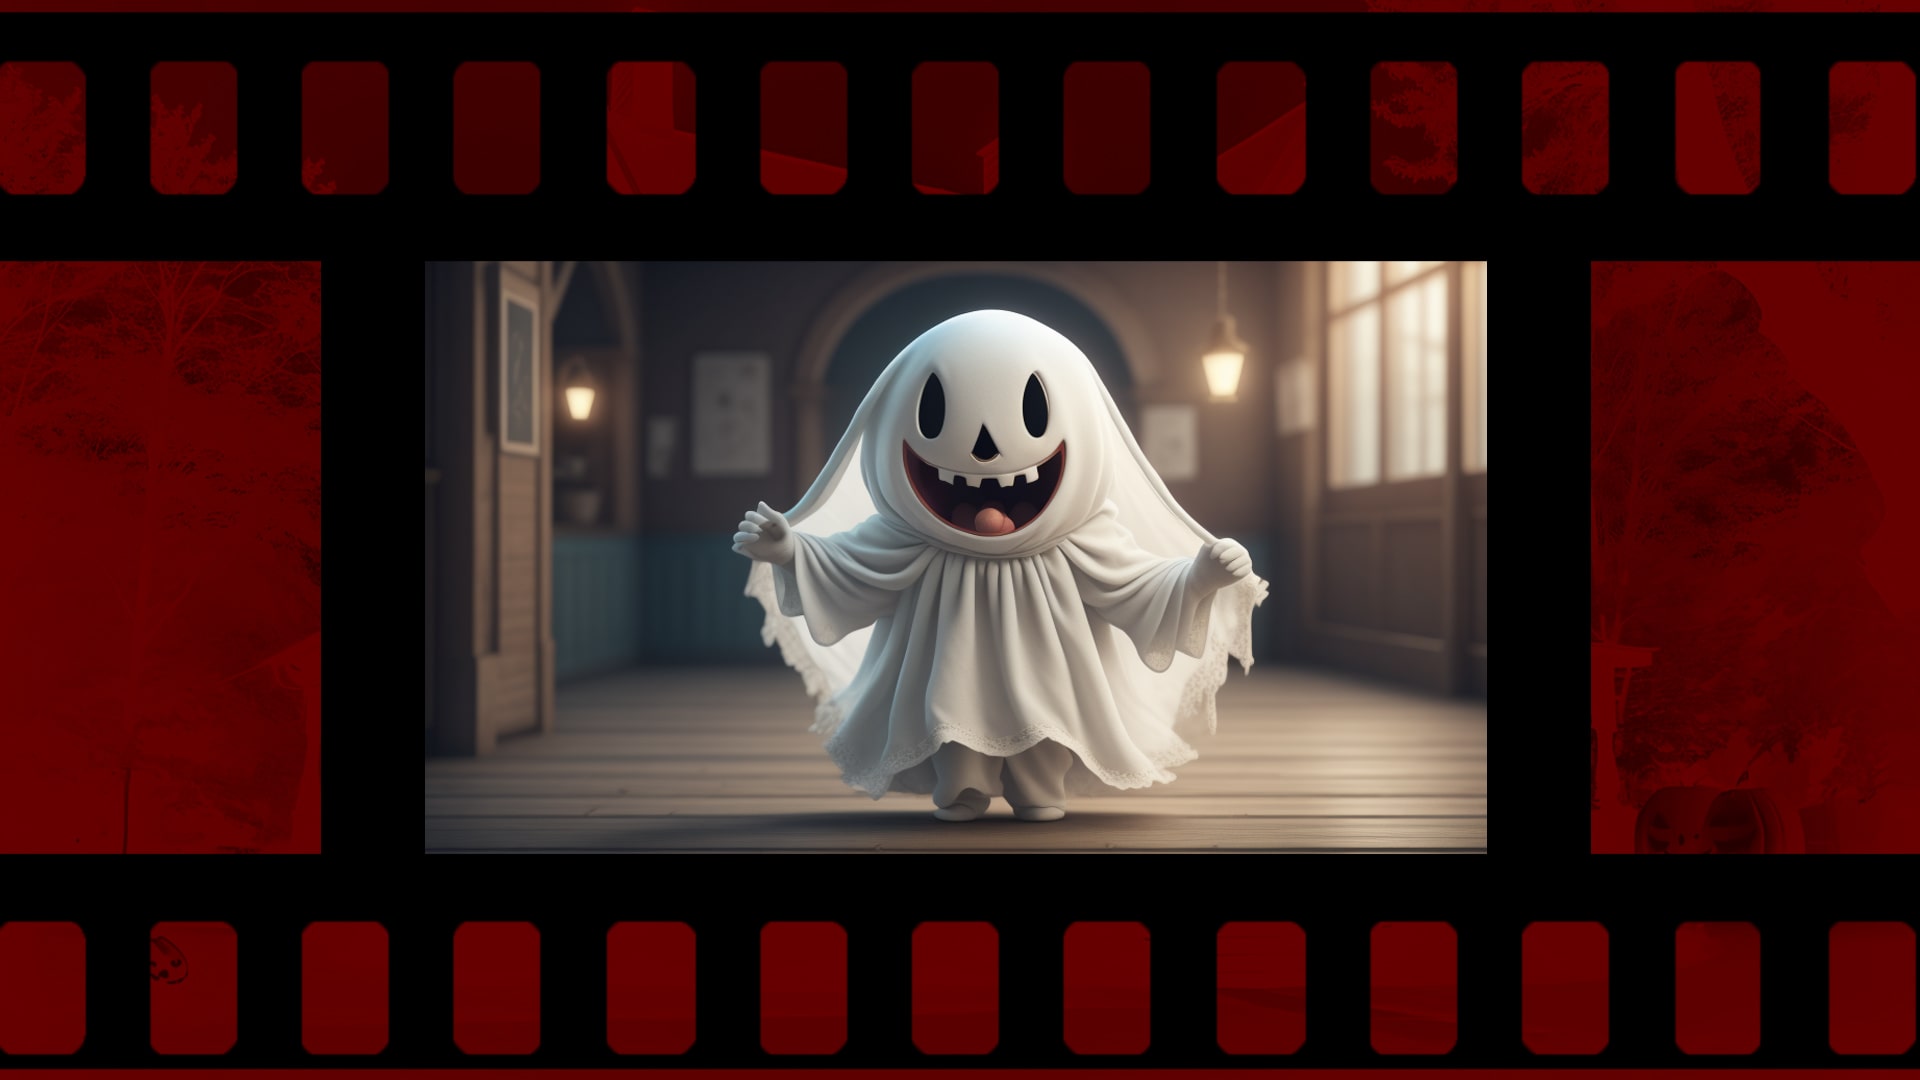 A playful ghost with a friendly smile